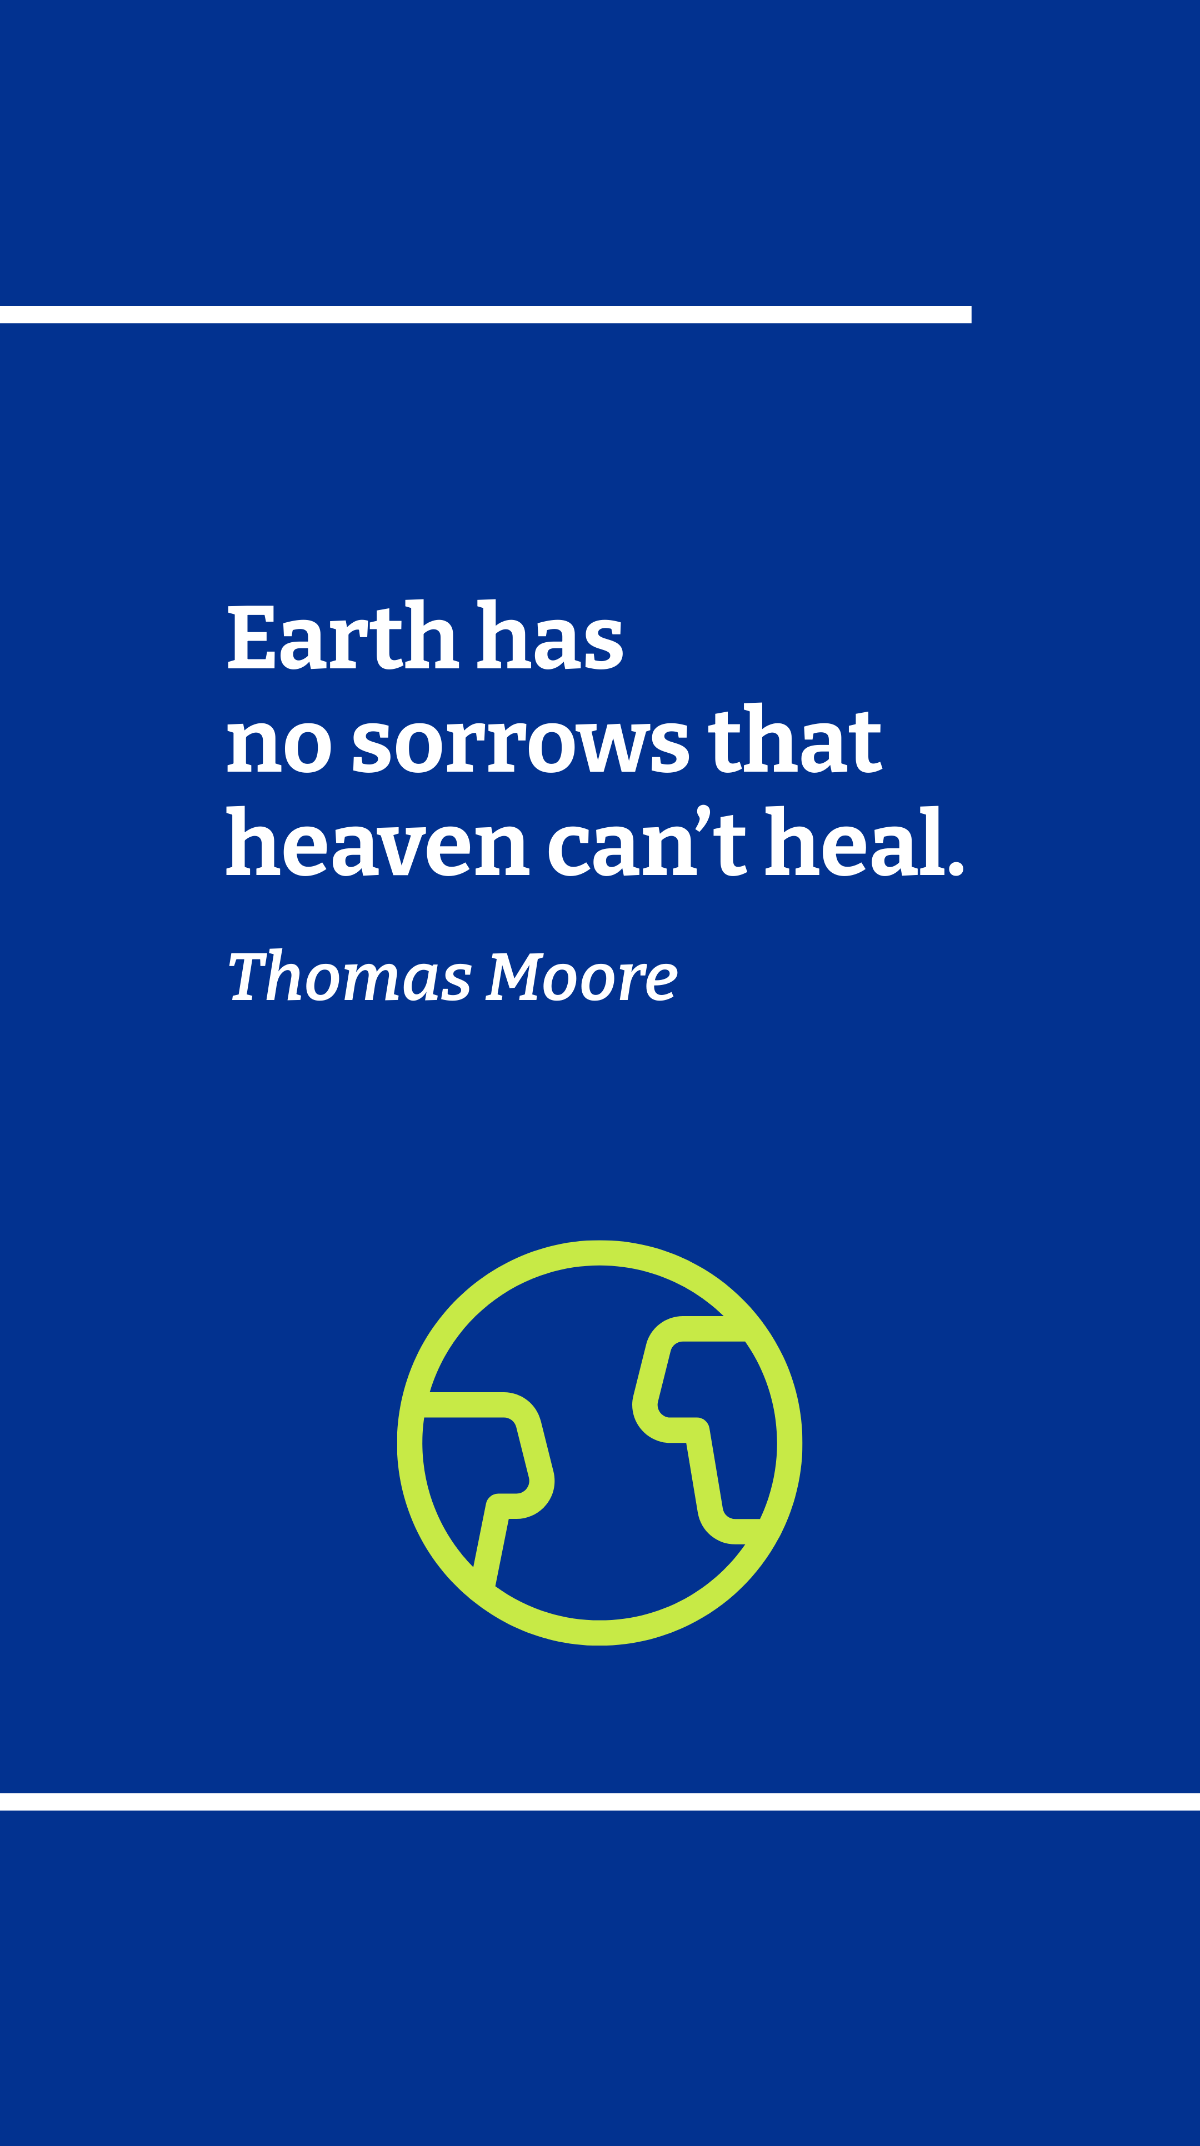 Thomas Moore - Earth has no sorrows that heaven can’t heal. Template